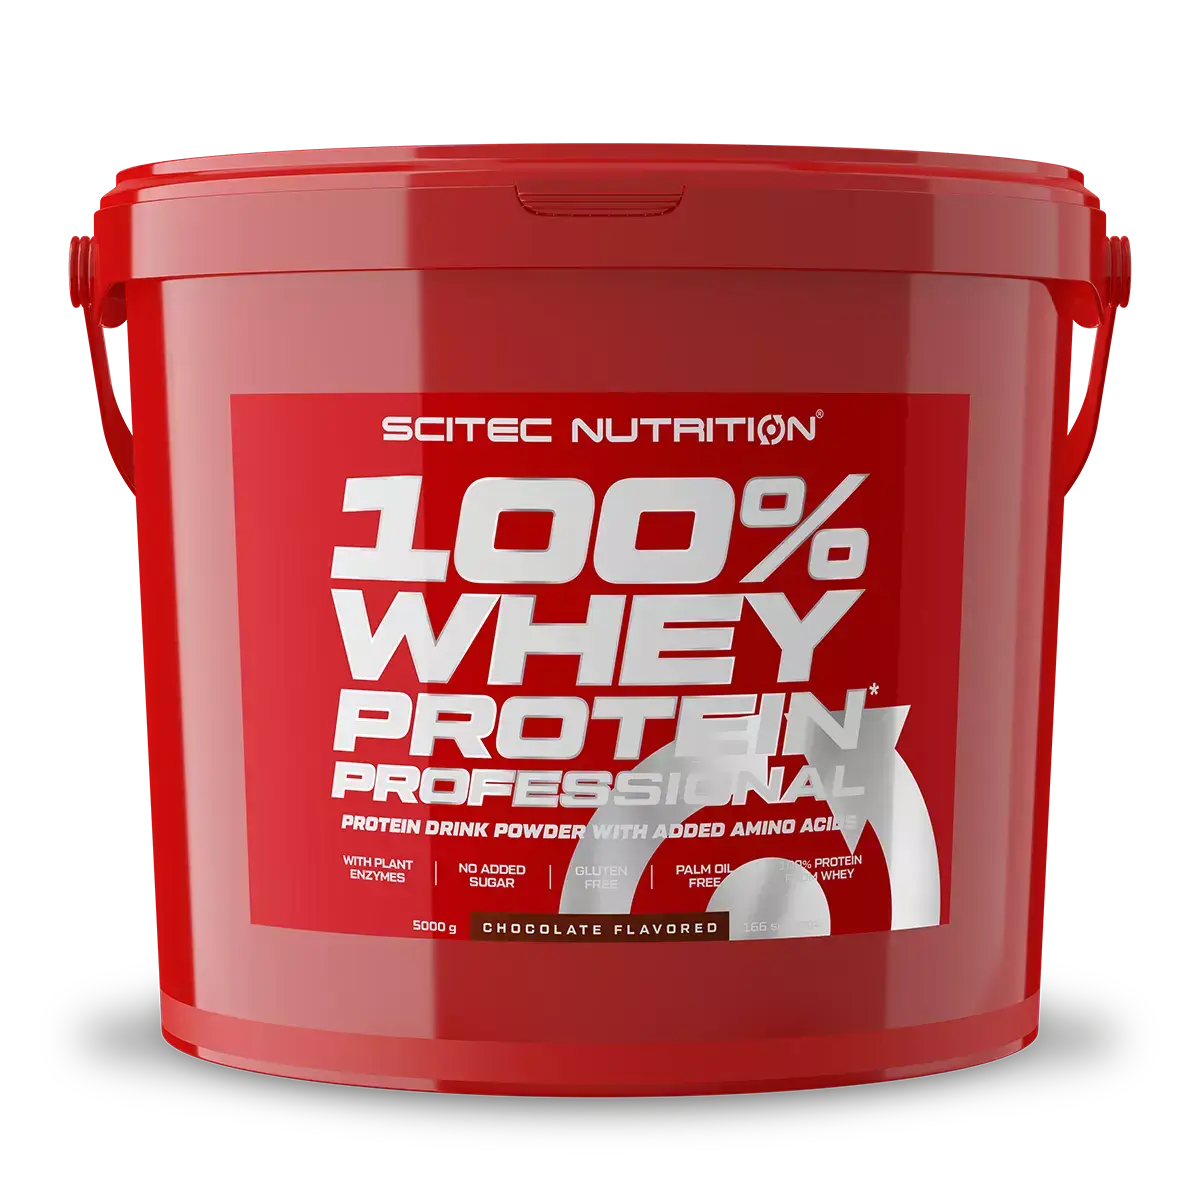 SCITEC NUTRITION - Whey Protein Professional